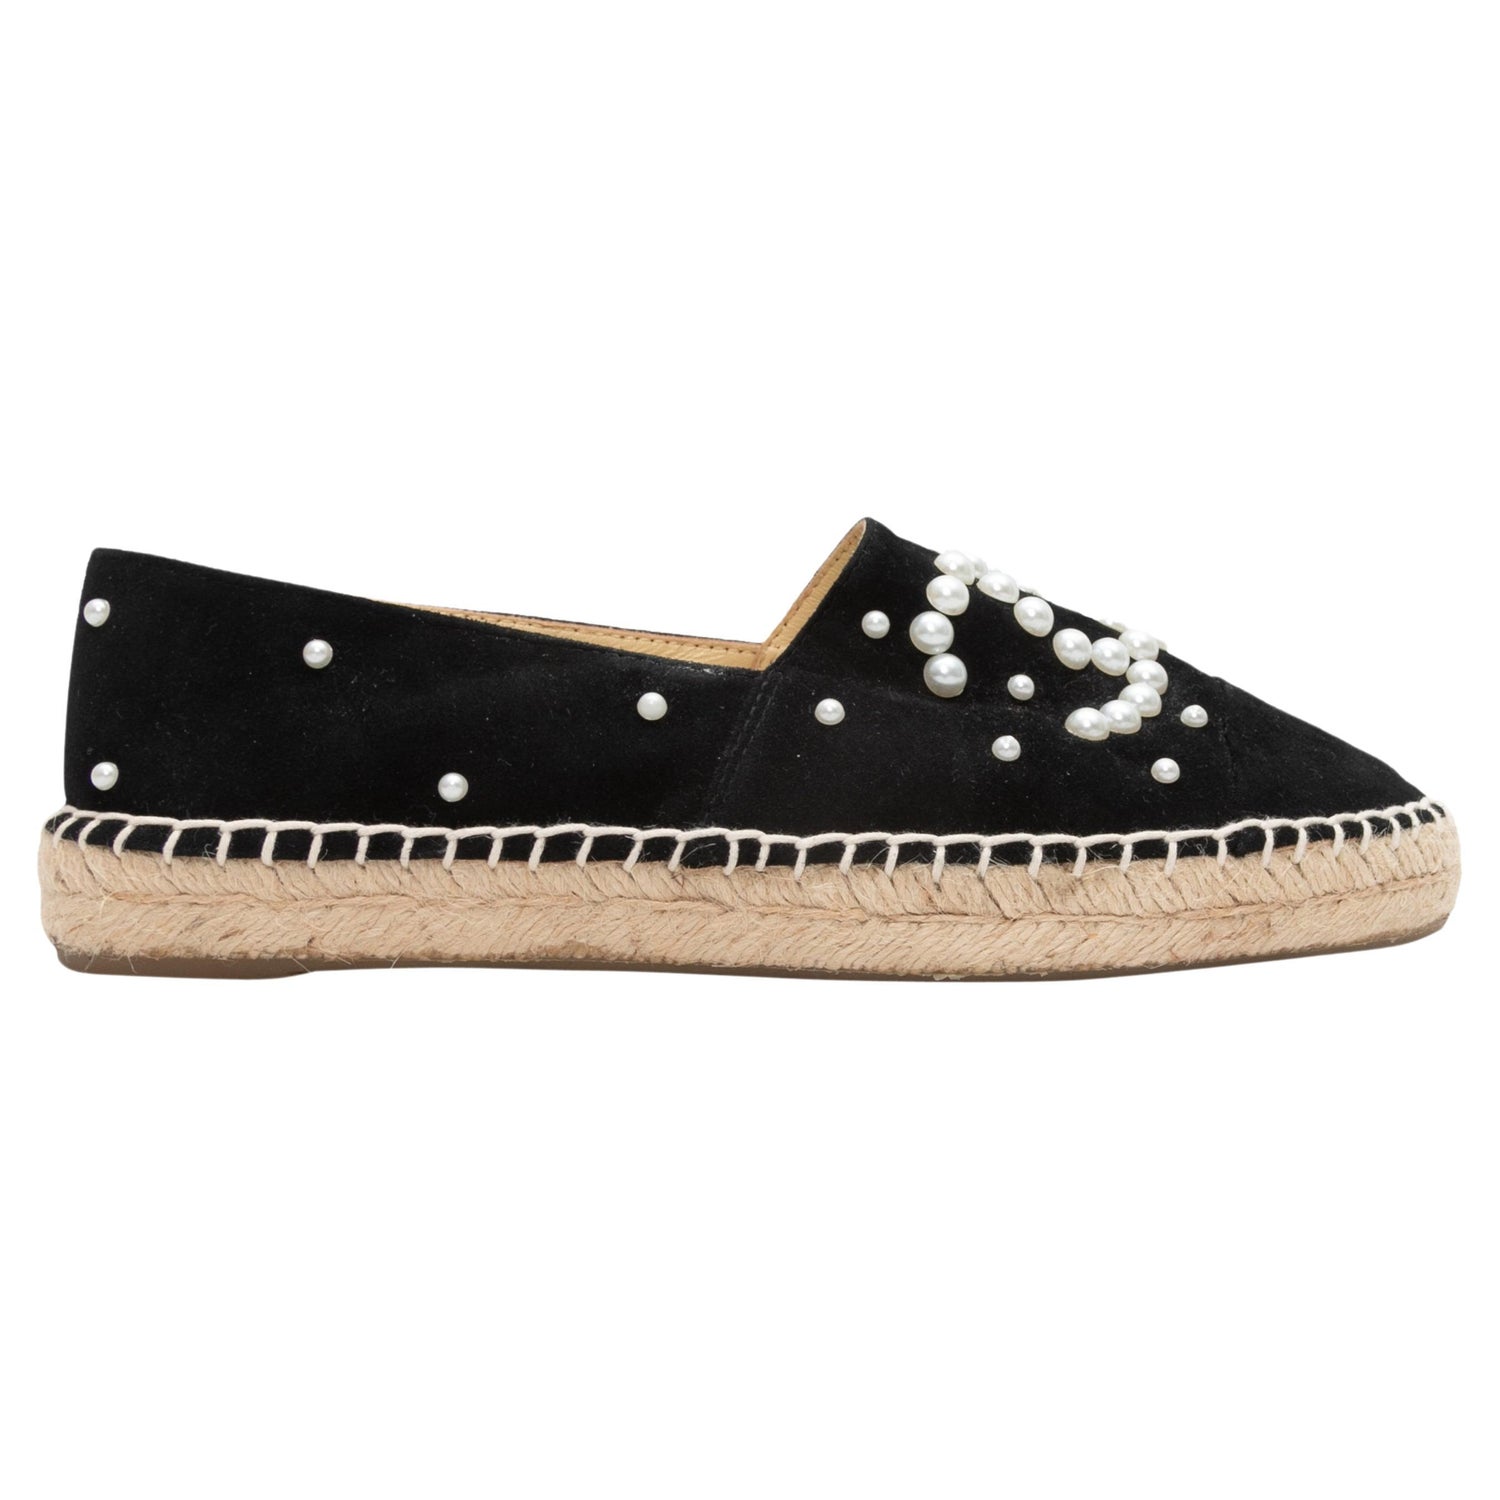 Chanel Pearl Espadrilles - 10 For Sale on 1stDibs  faux chanel espadrilles,  espadrilles chanel, chanel espadrilles with pearls